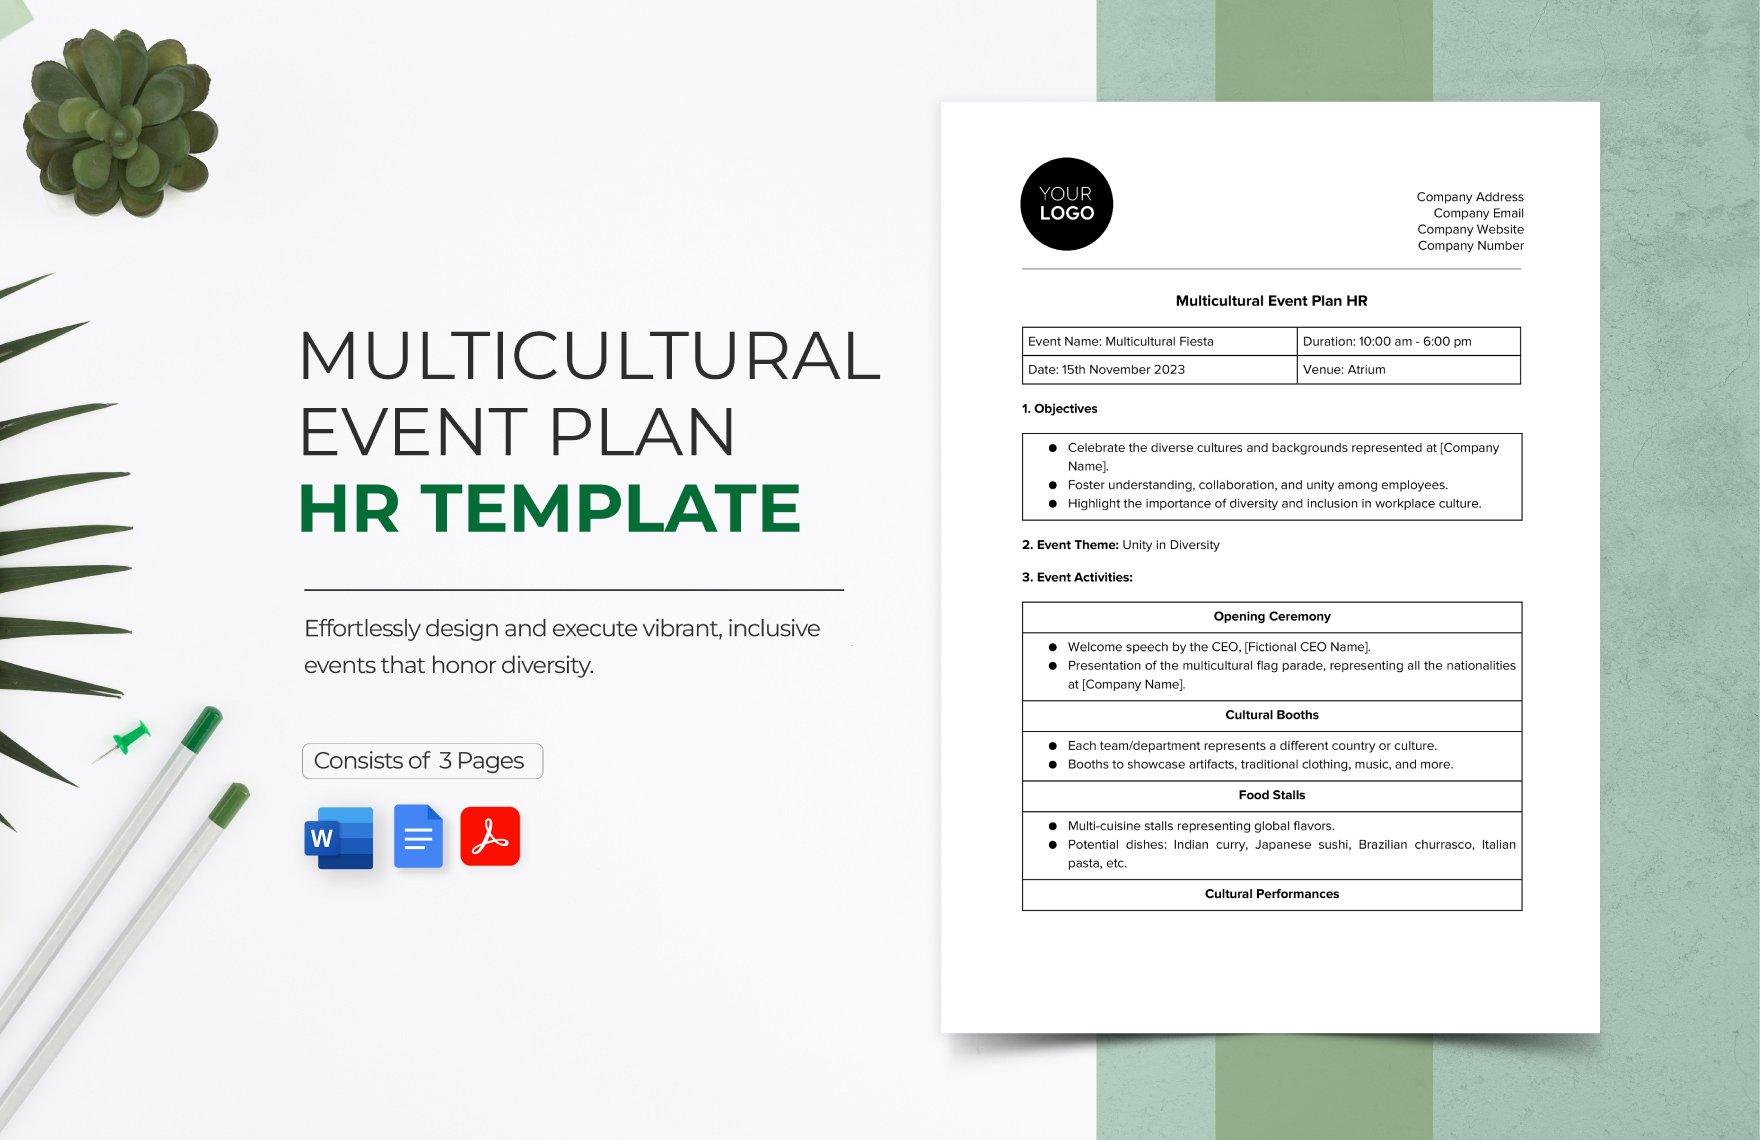 Multicultural Event Plan HR Template in Word, Google Docs, PDF